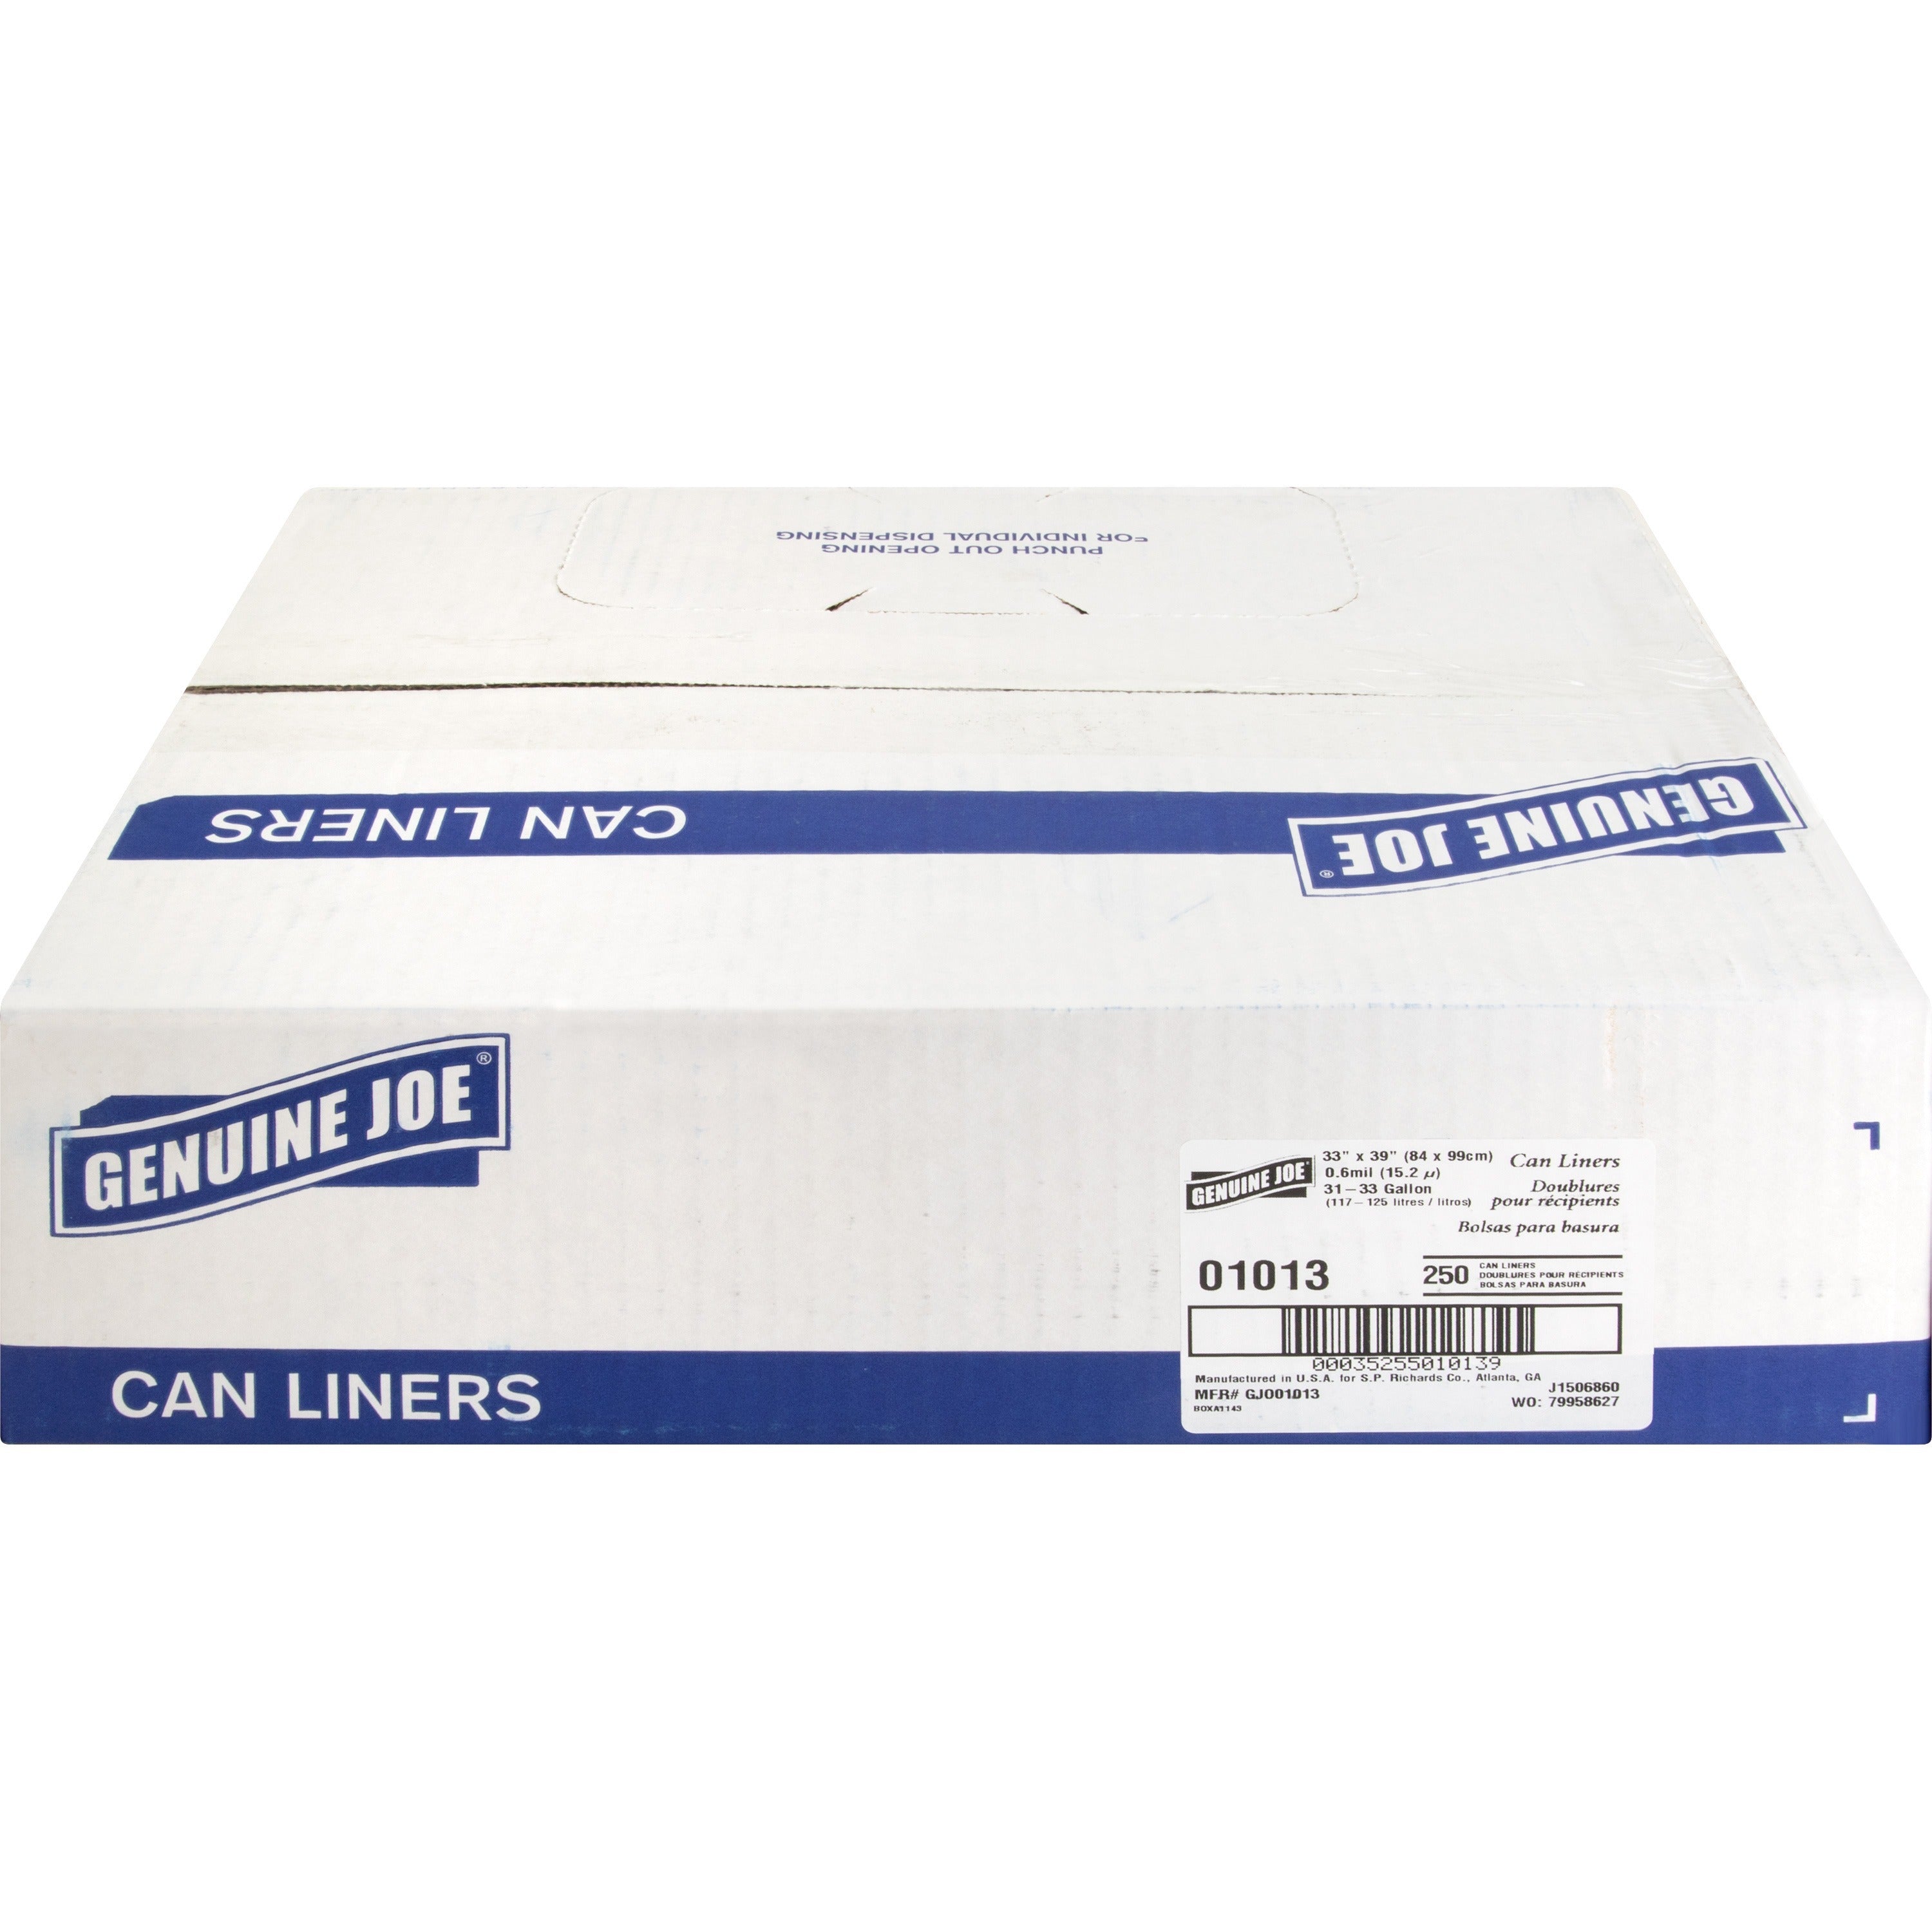 Genuine Joe Clear Trash Can Liners - Medium Size - 33 gal Capacity - 33" Width x 39" Length - 0.60 mil (15 Micron) Thickness - Low Density - Clear - 250/Carton - 